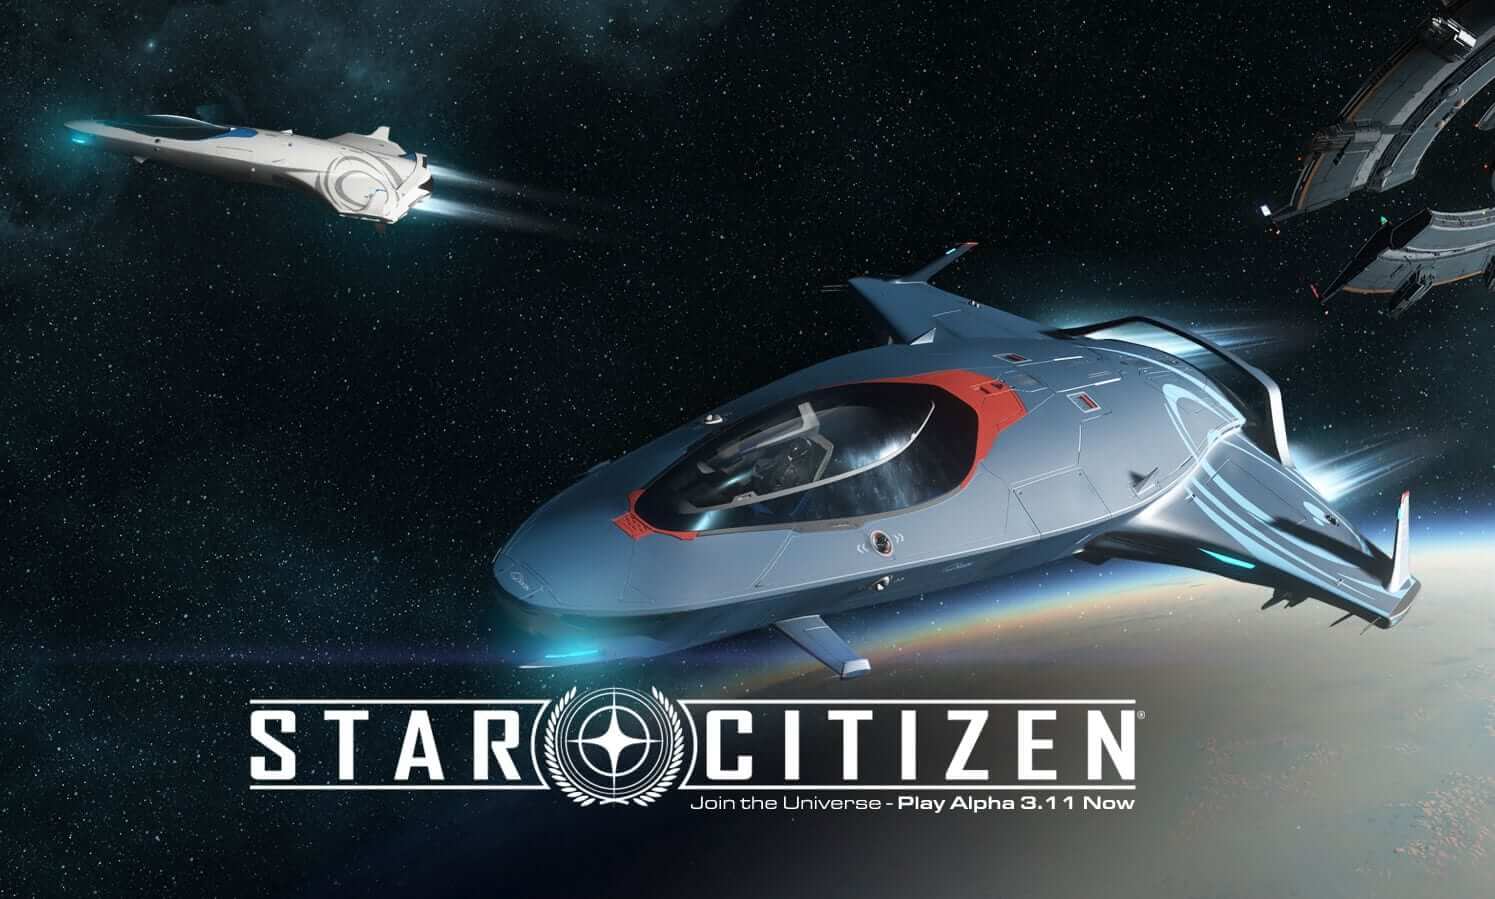 Star Citizen is free to play until February 25th